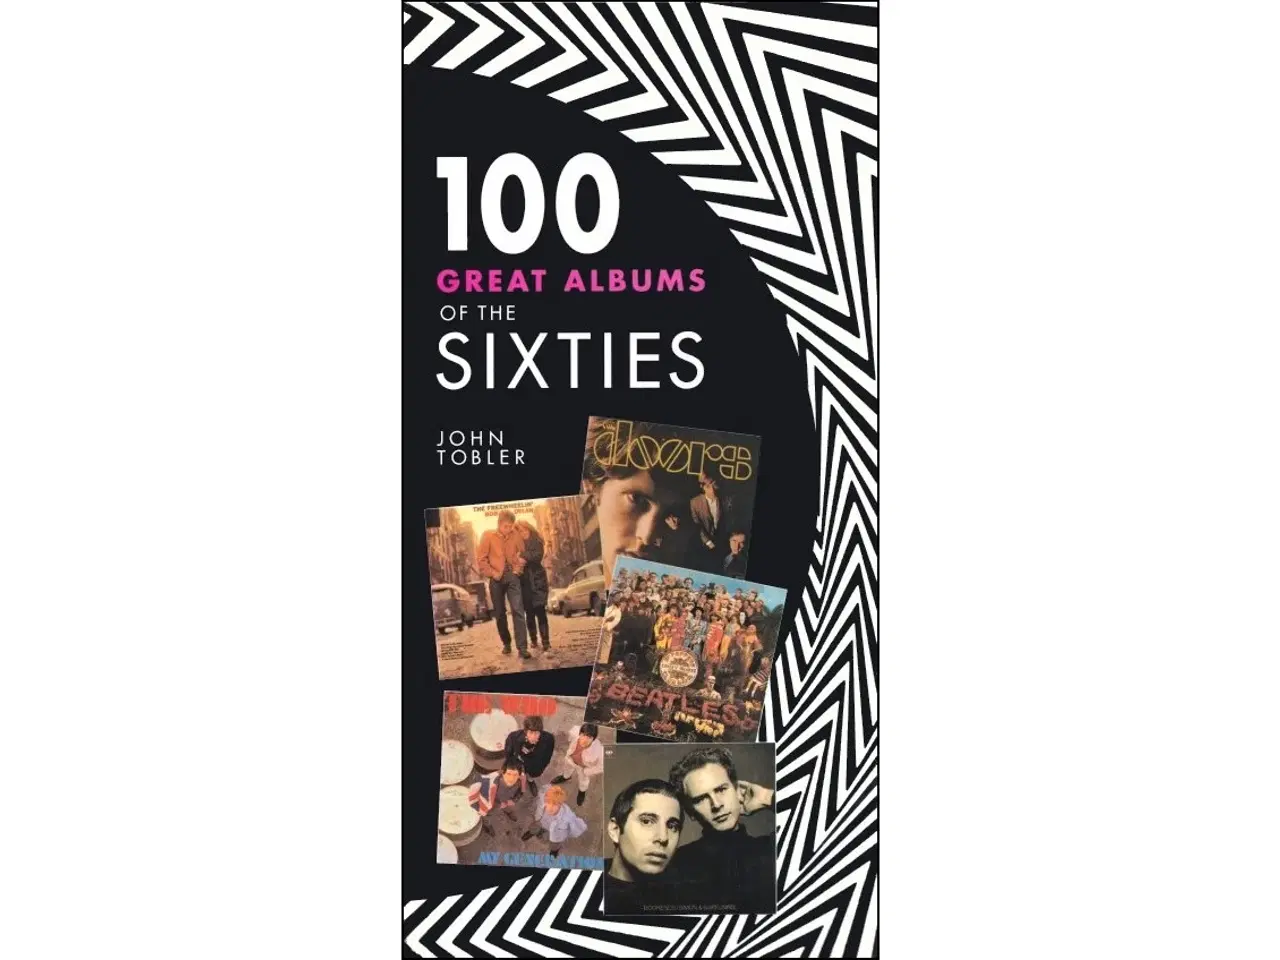 Billede 1 - 100 Great Albums of the Sixties